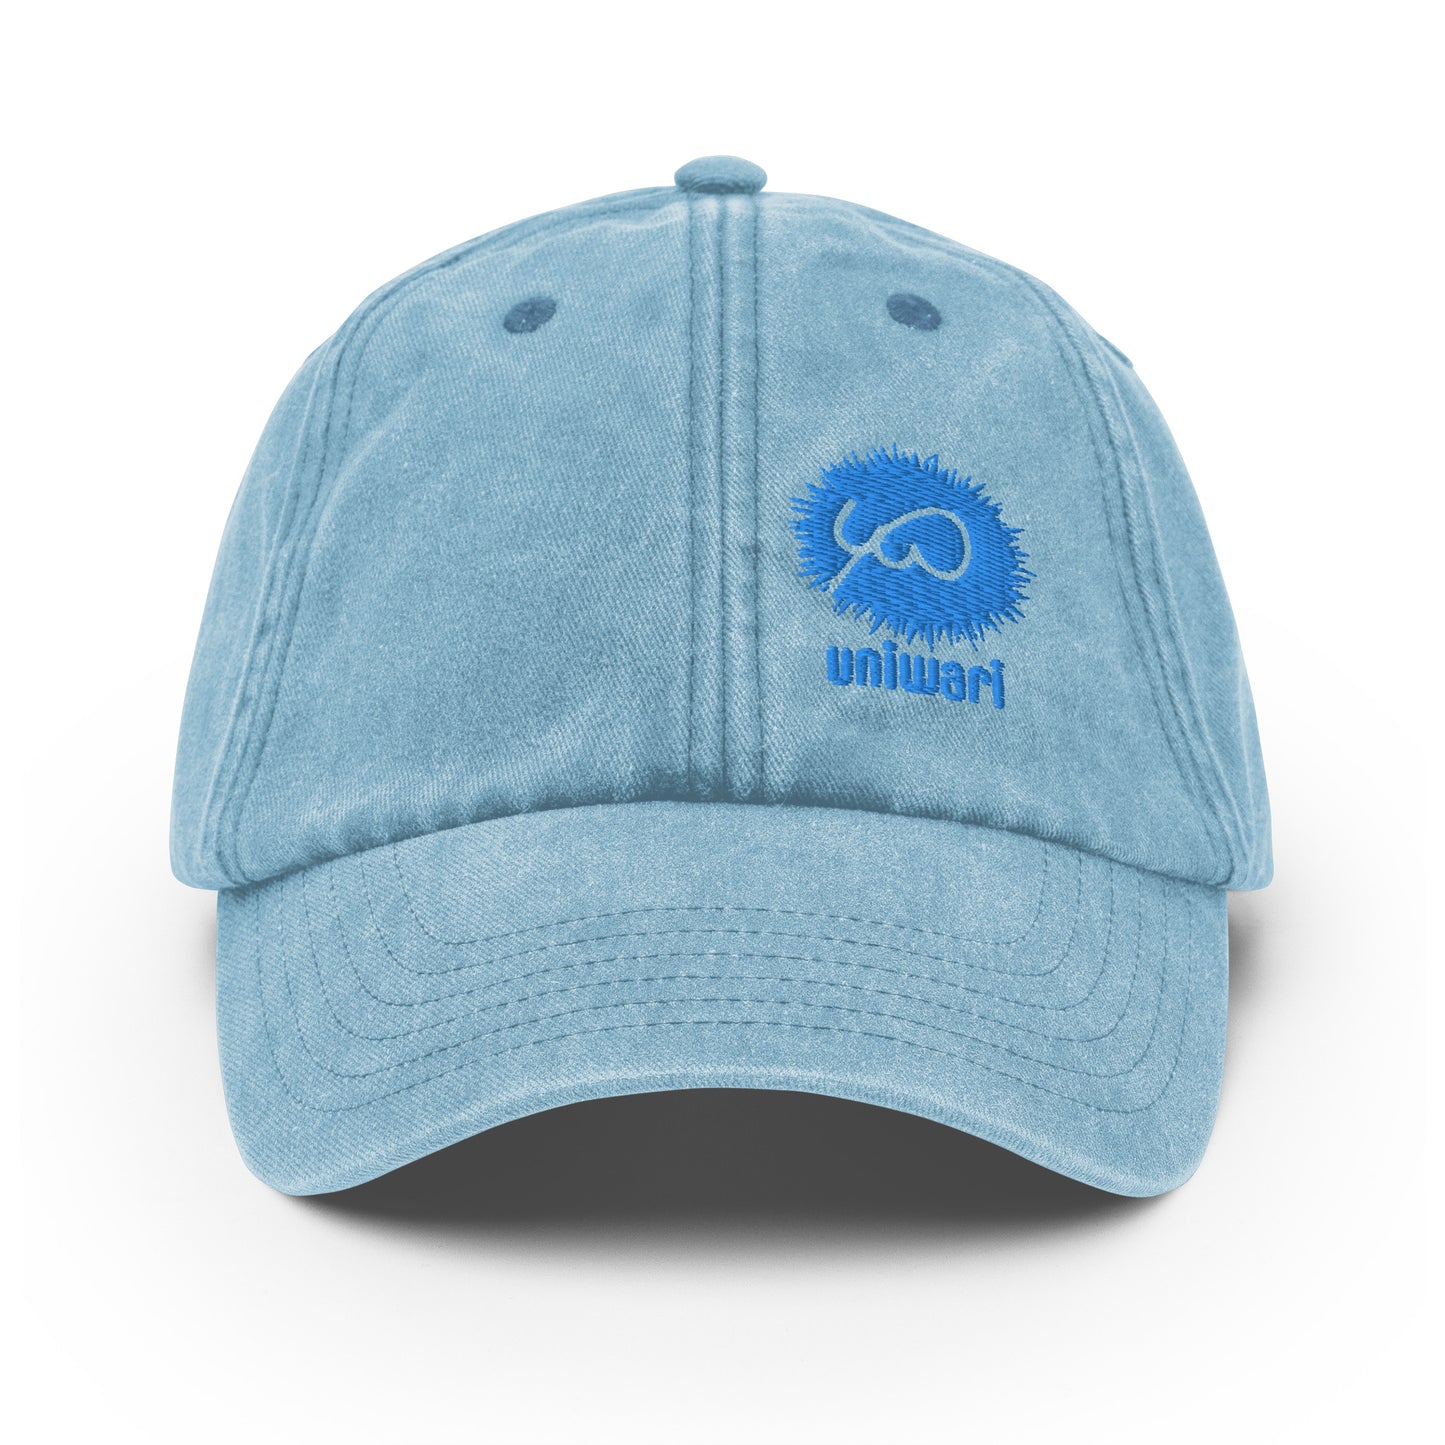 Light Blue Cap- Front Design with an Blue Embroidery of Uniwari Logo